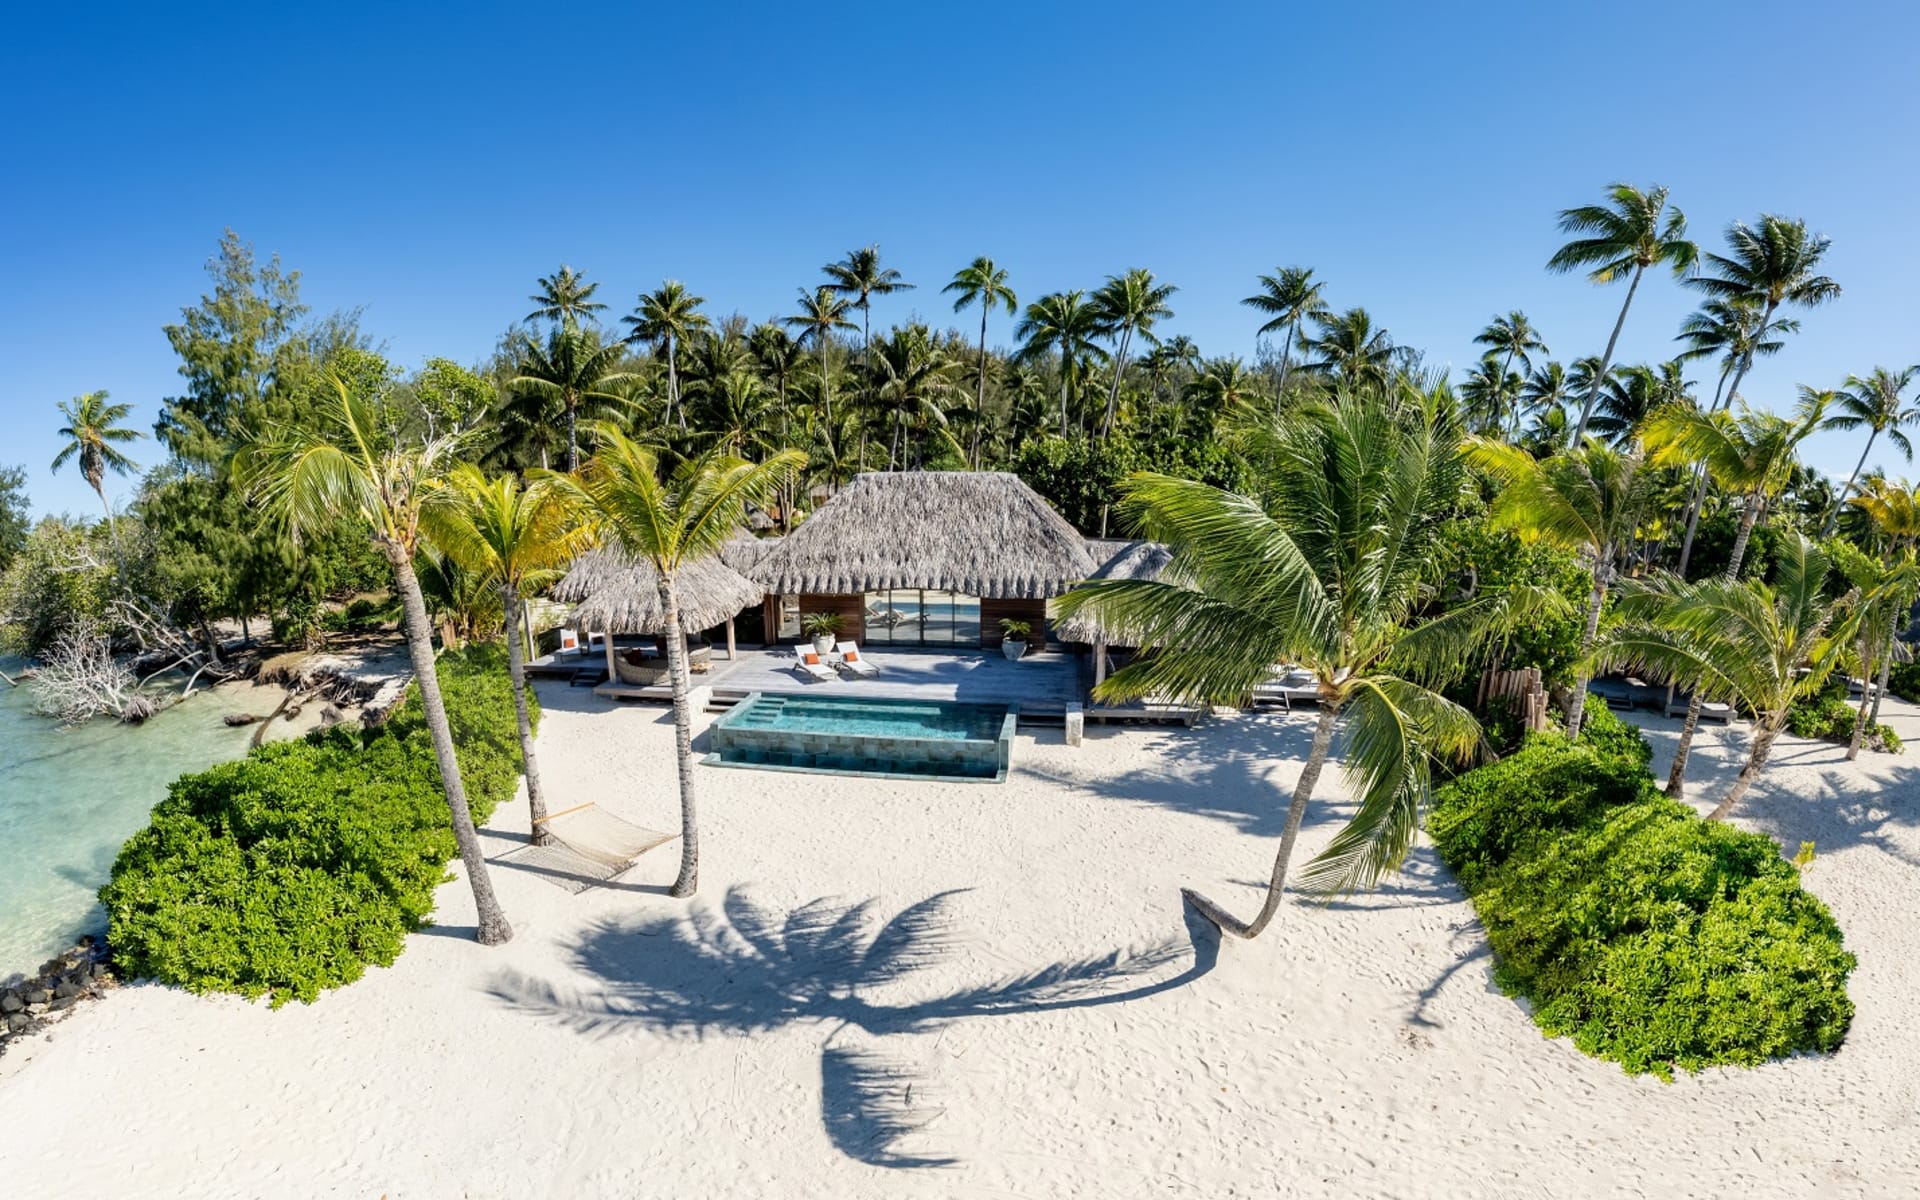 A massive thatched-roof villa with a private pool opens onto the beach and is surrounded by palm trees. 